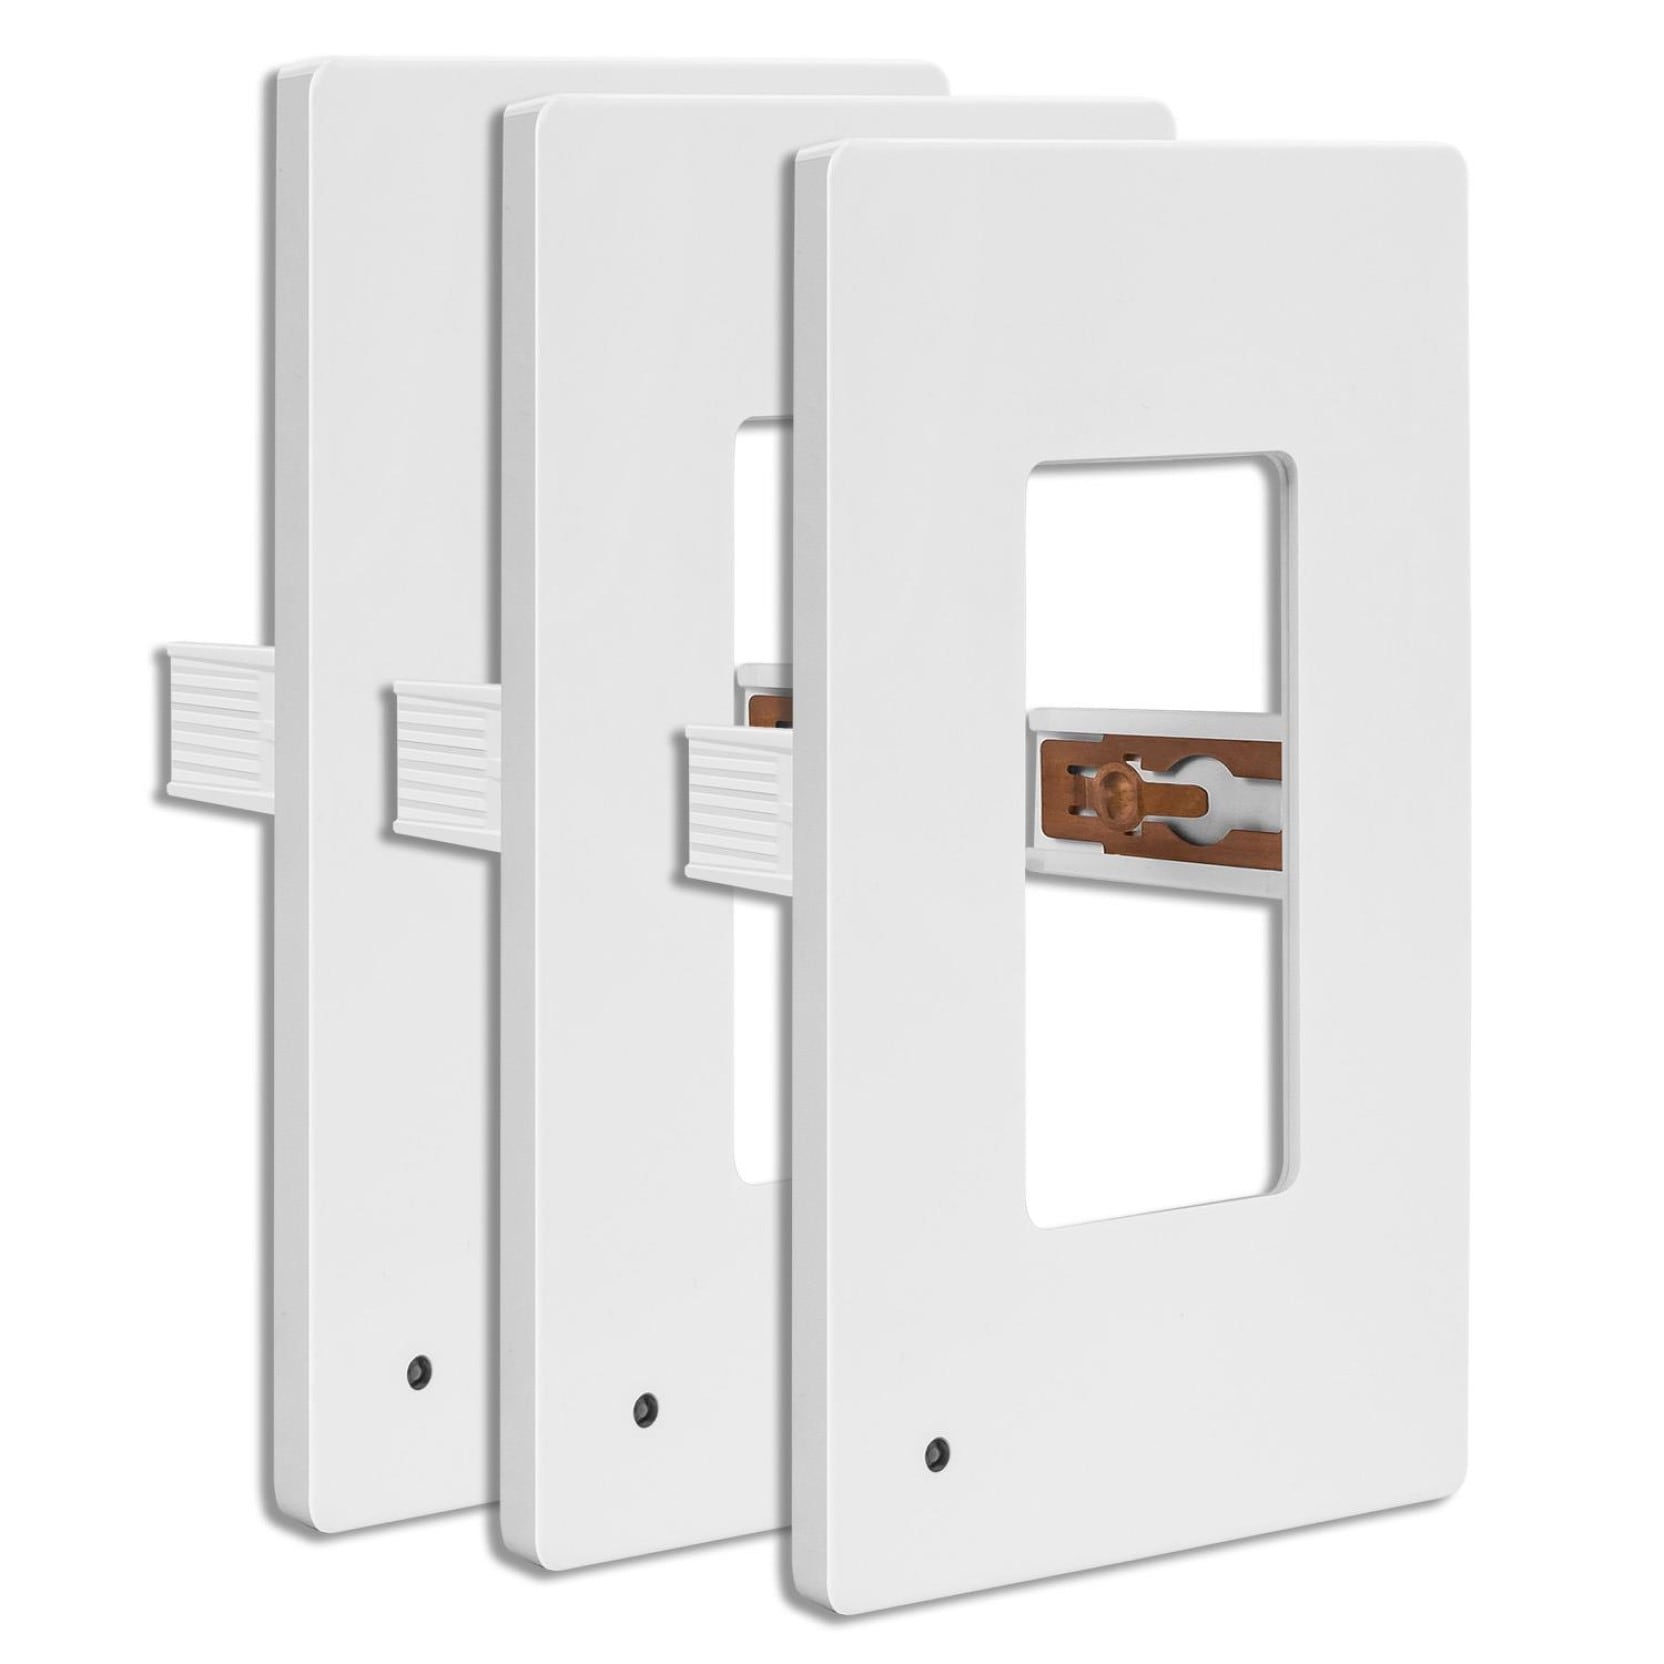 SnapPower GuideLight 2 Plus 1-Gang GFCI Wall Plate, White